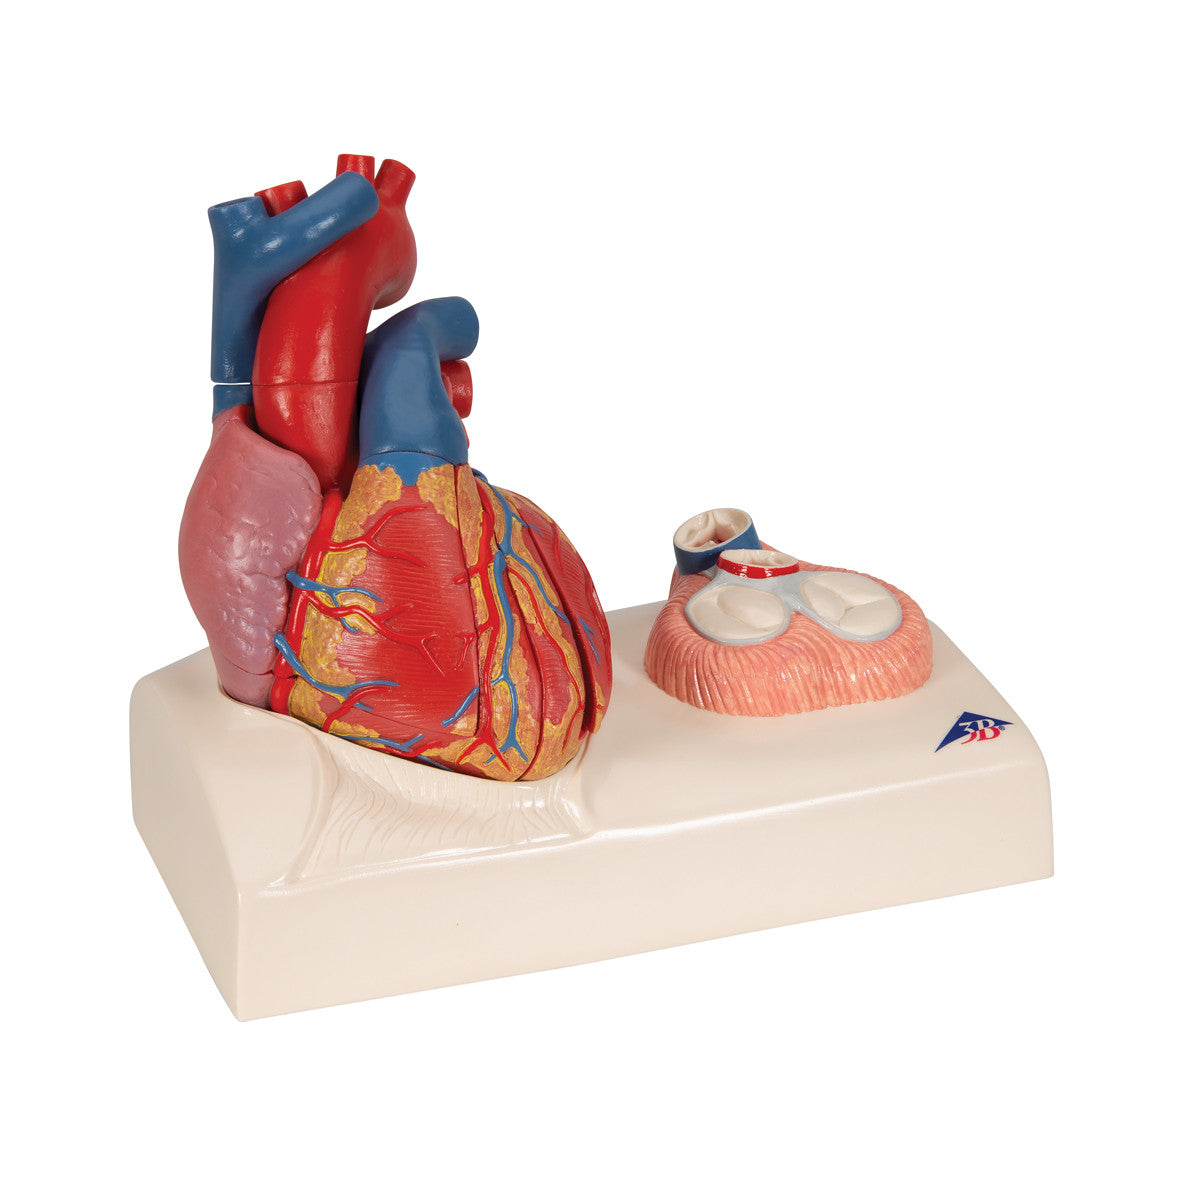 Magnetic Heart model, life-size, 5 parts - 3B G01